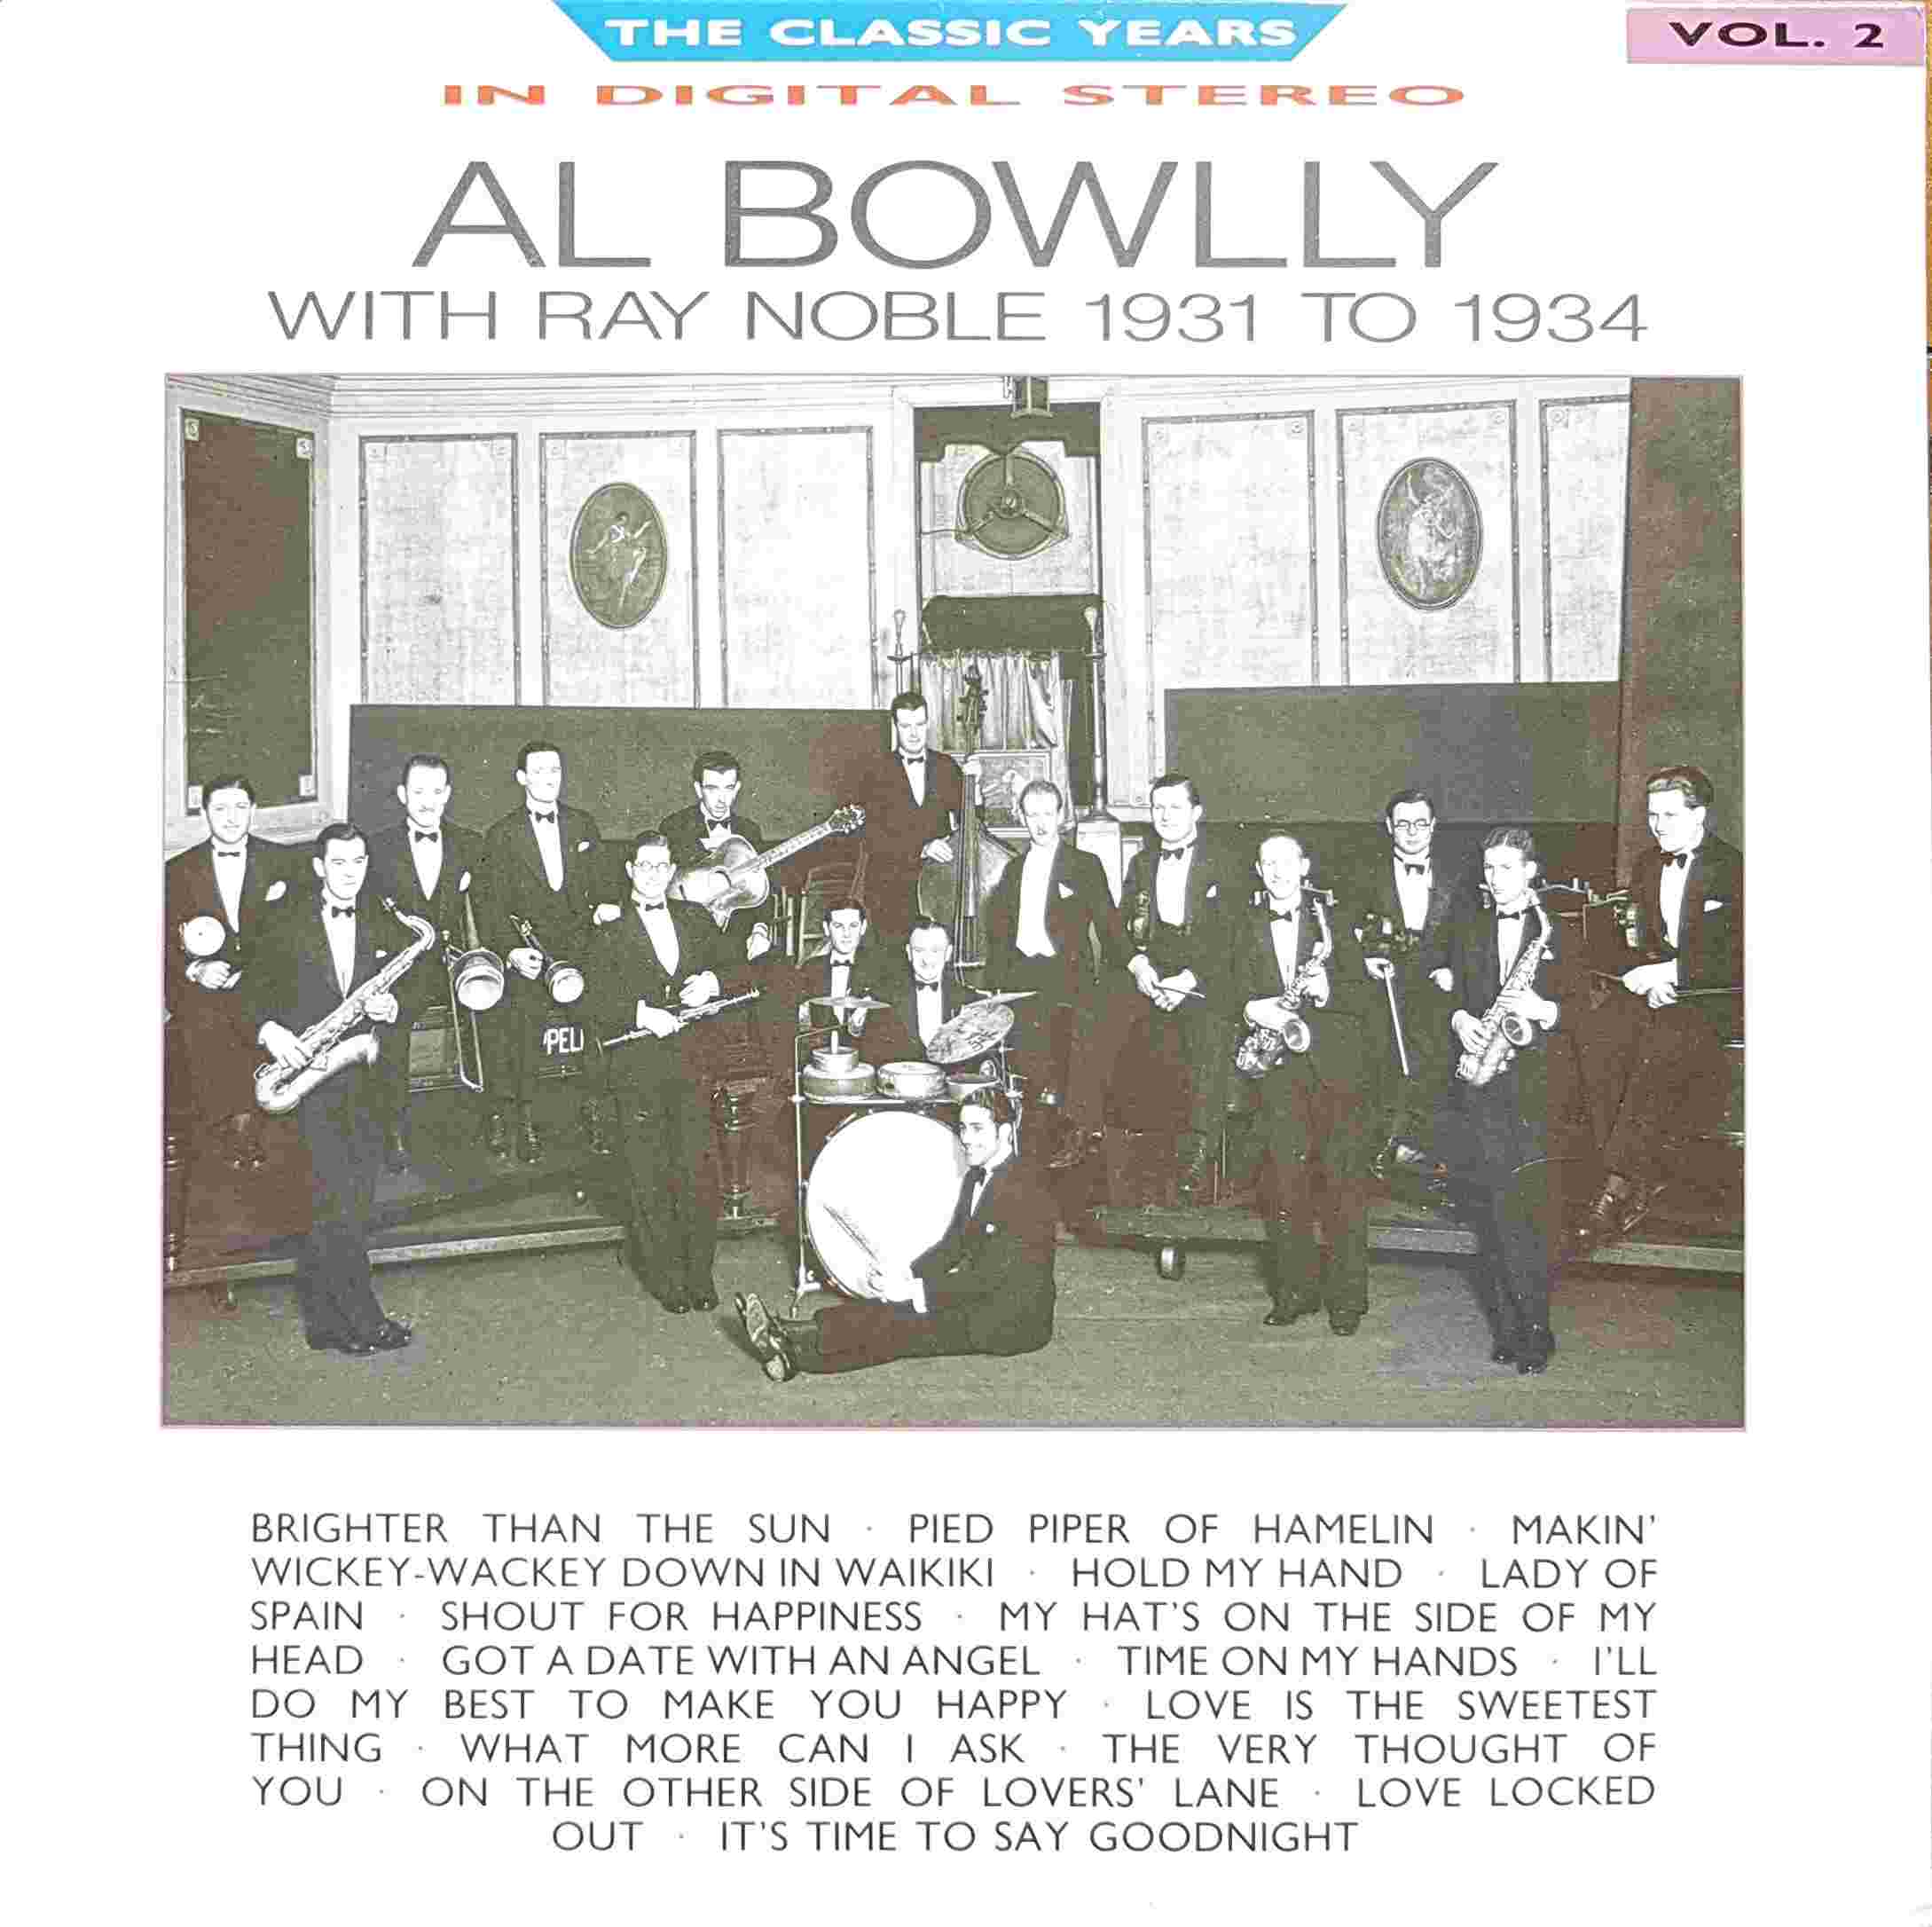 Picture of REB 649 Classic years - Volume 2, Al Bowlly by artist Al Bowlly from the BBC albums - Records and Tapes library